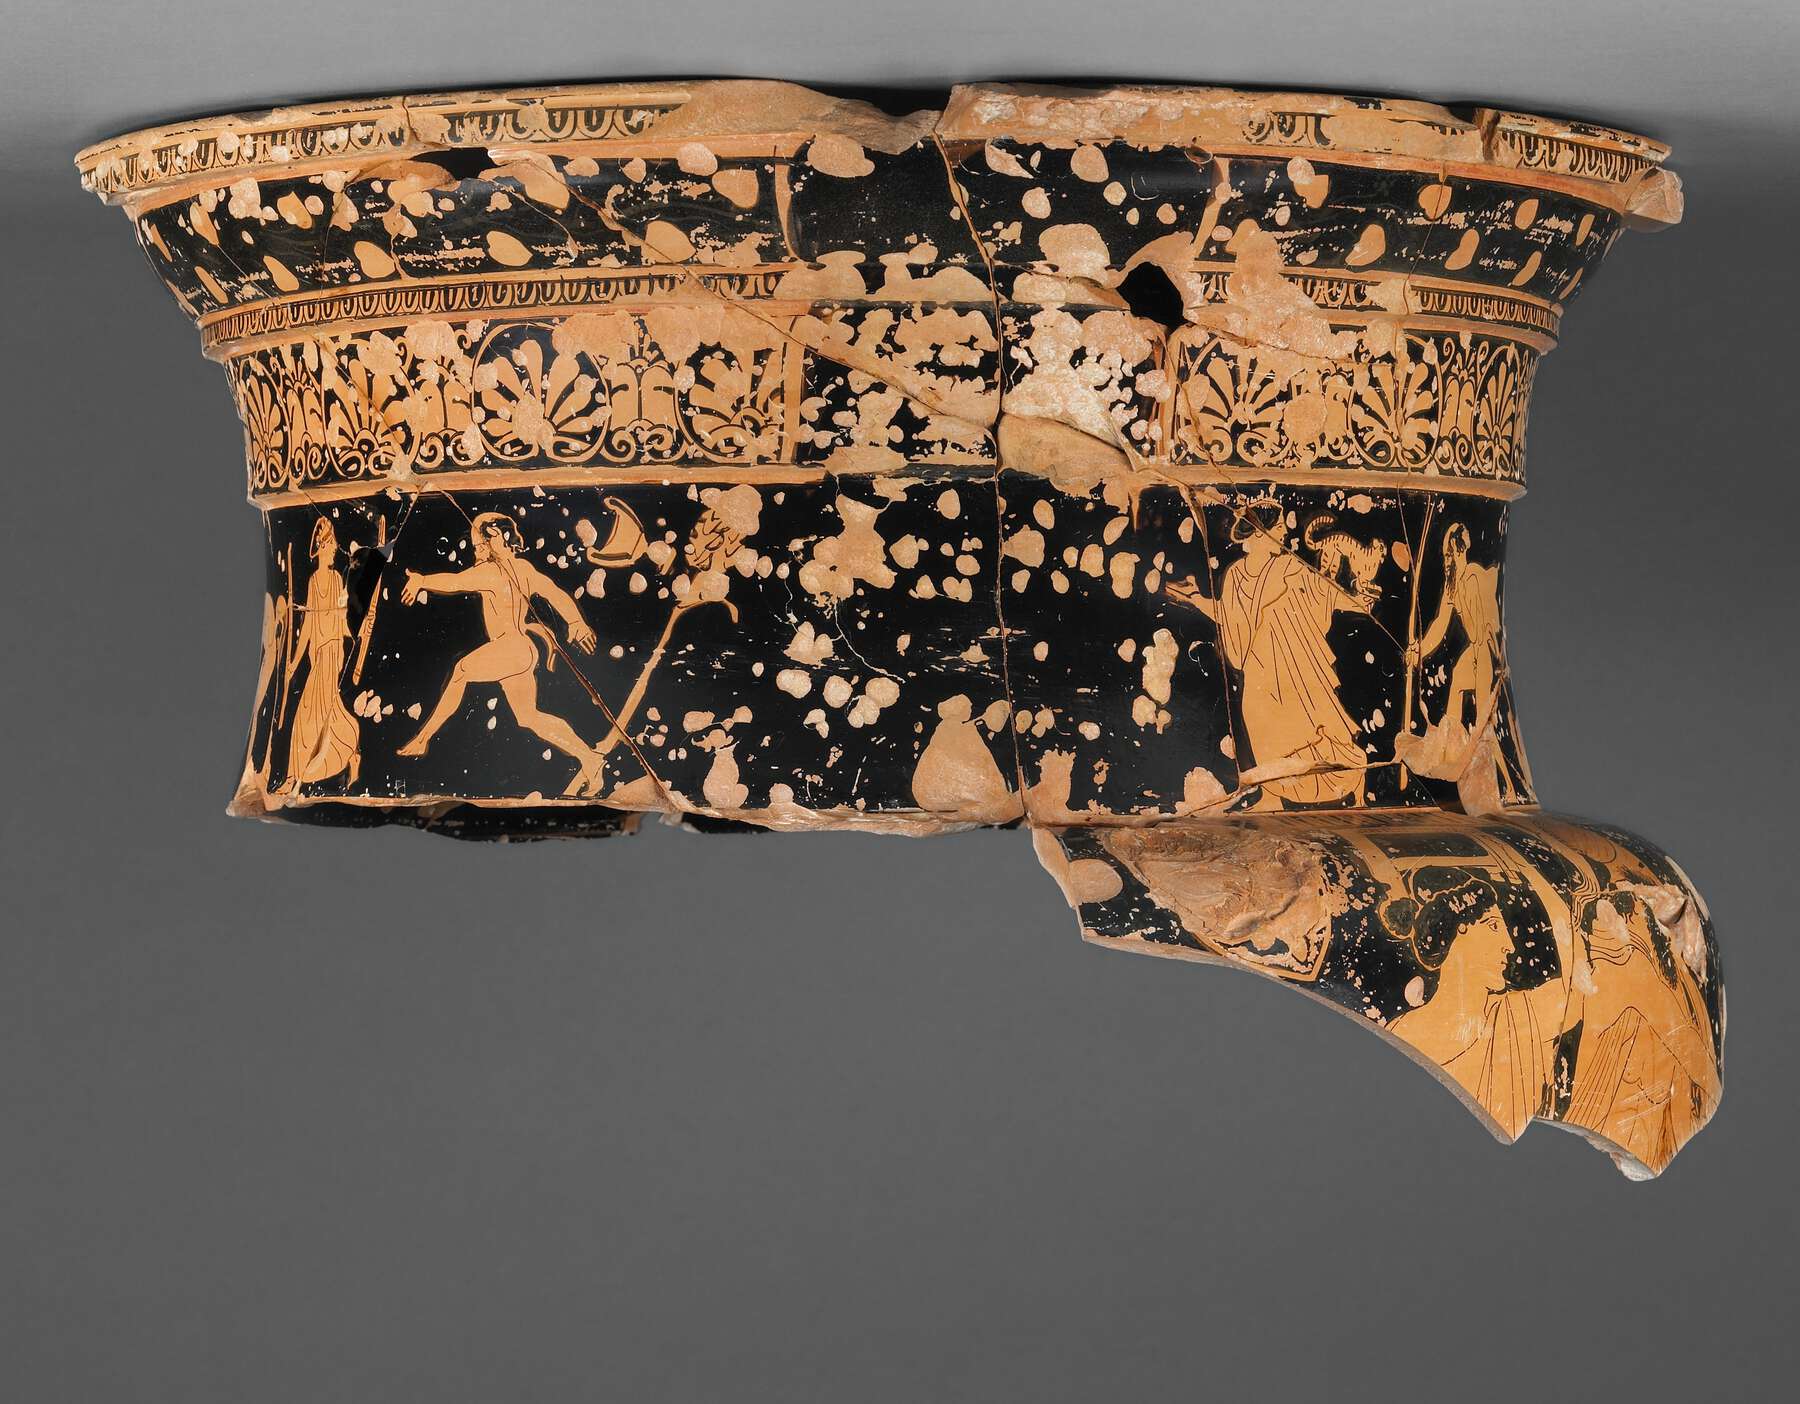 Another view of the top portion of the broken vase, showing where a handle looks like it broke off, showing more people and patterns